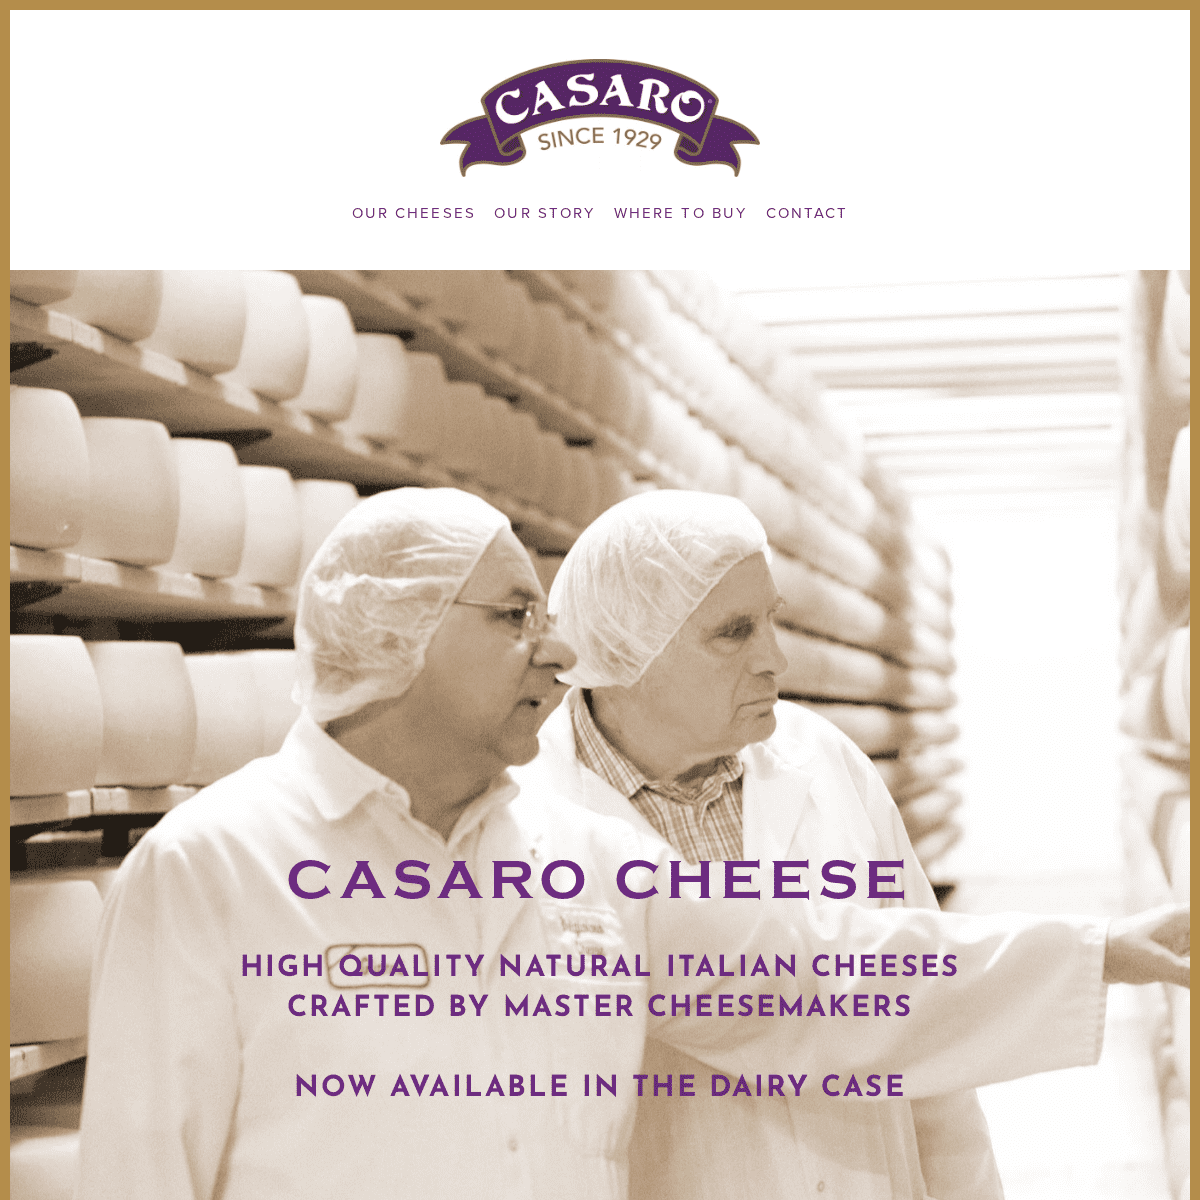 A complete backup of casarocheese.com